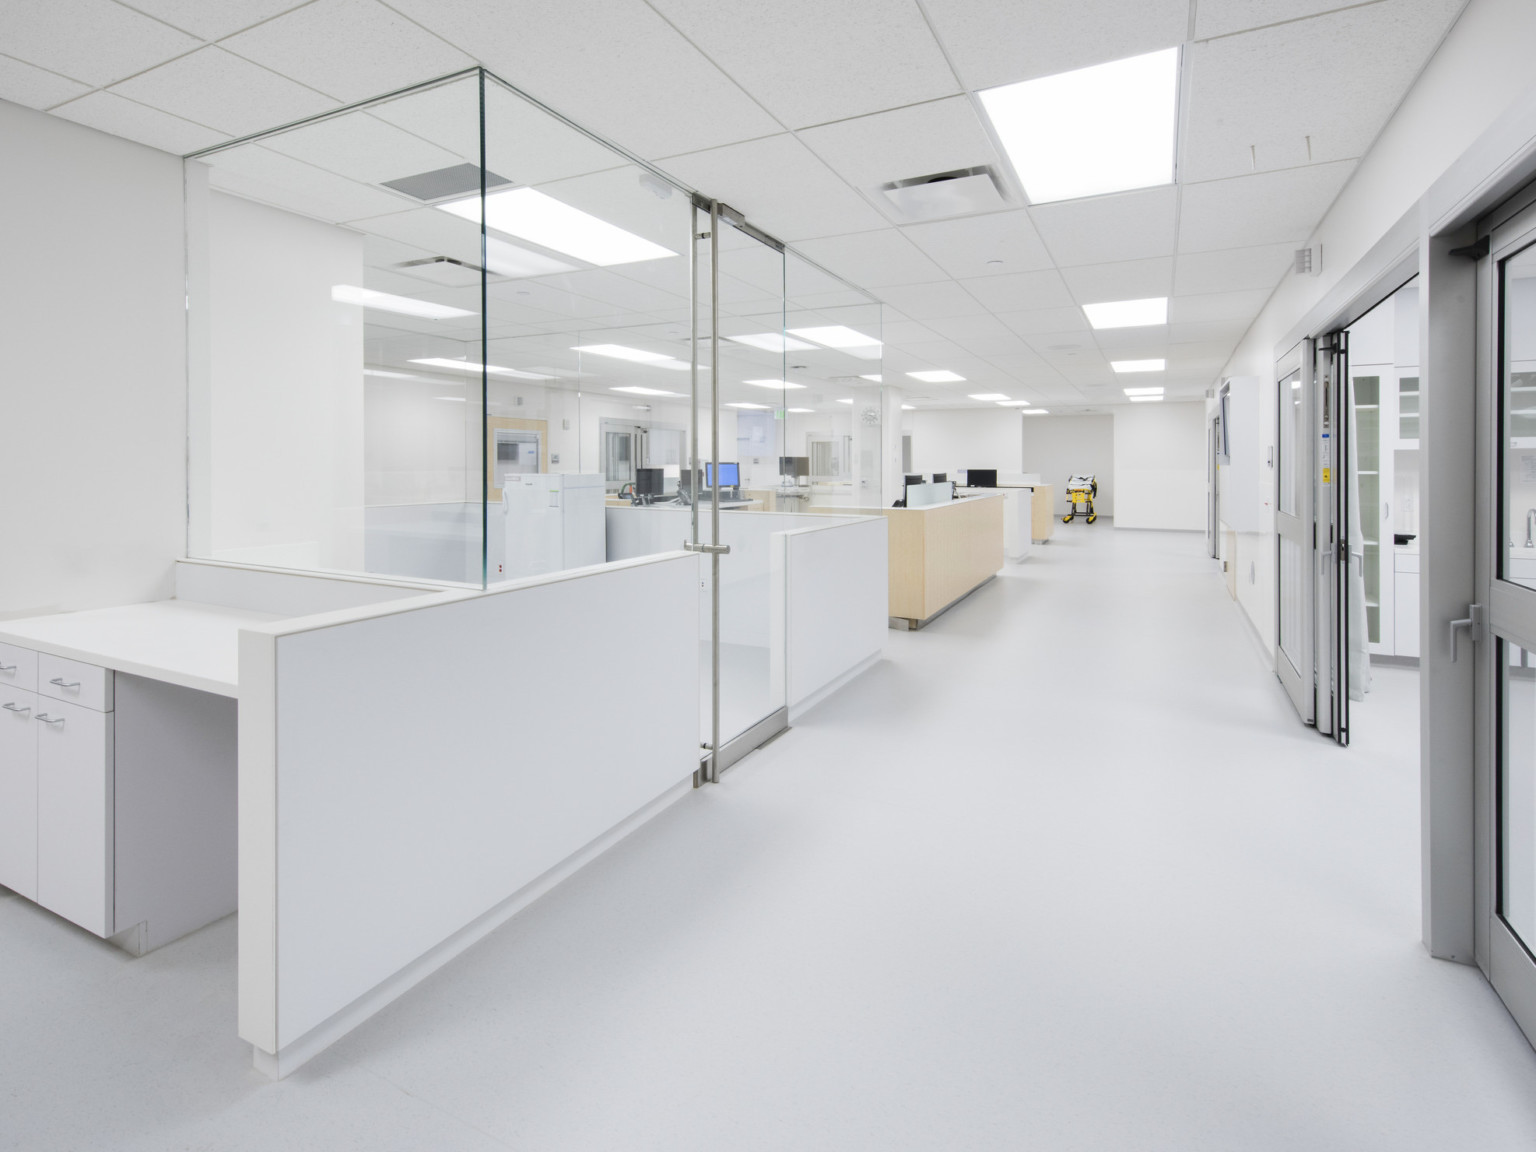 Bright white emergency room nurses stations opposite patient rooms have glass walls for visibility